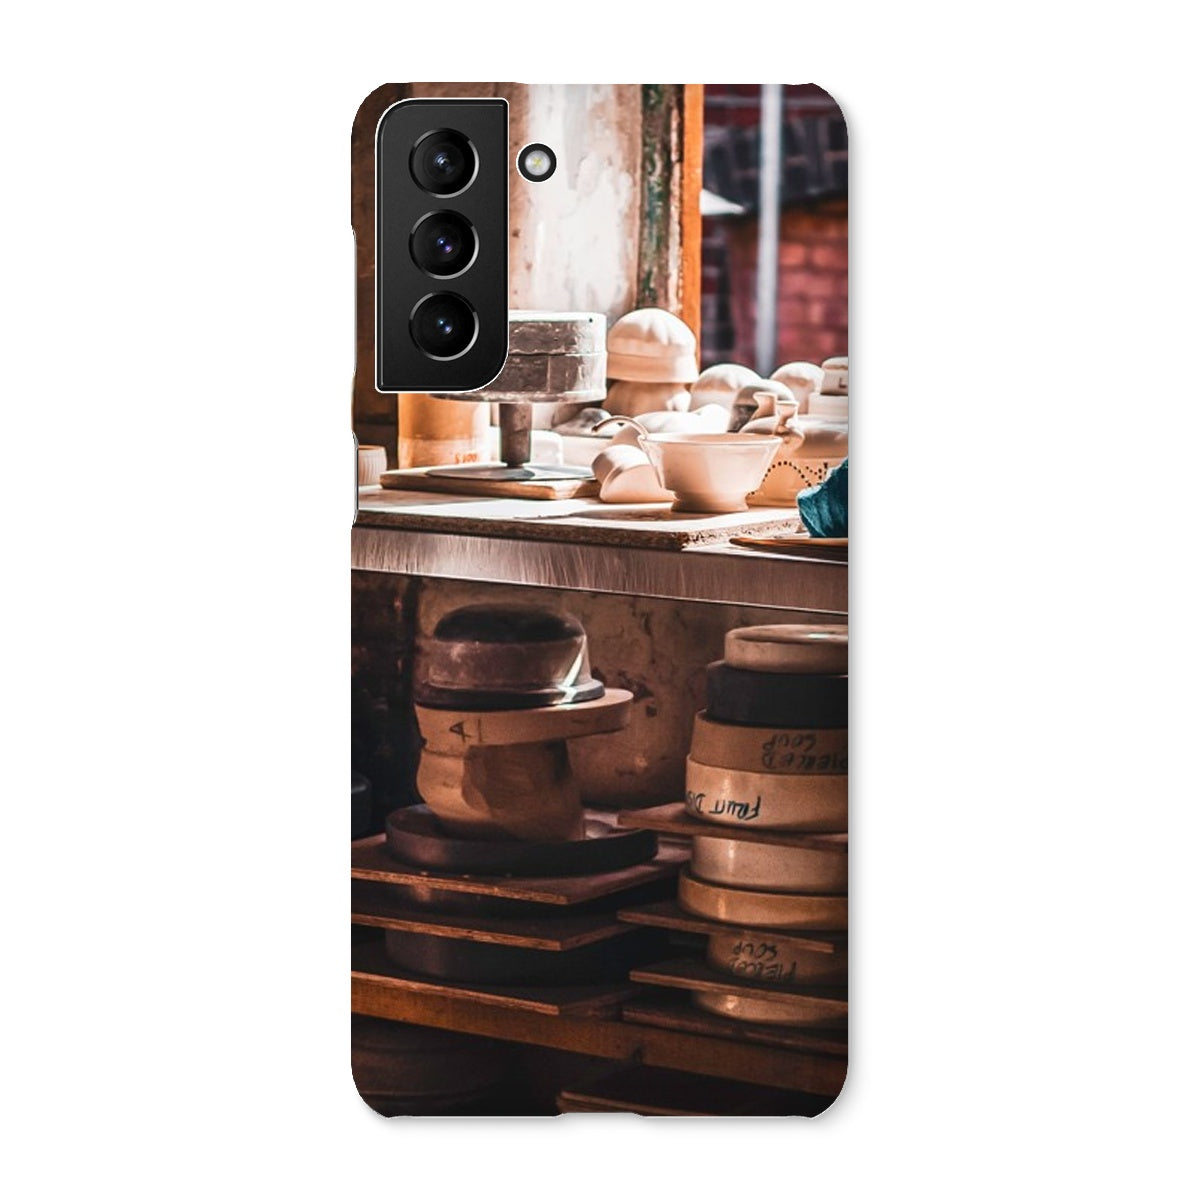 The Potter's Craft Snap Phone Case